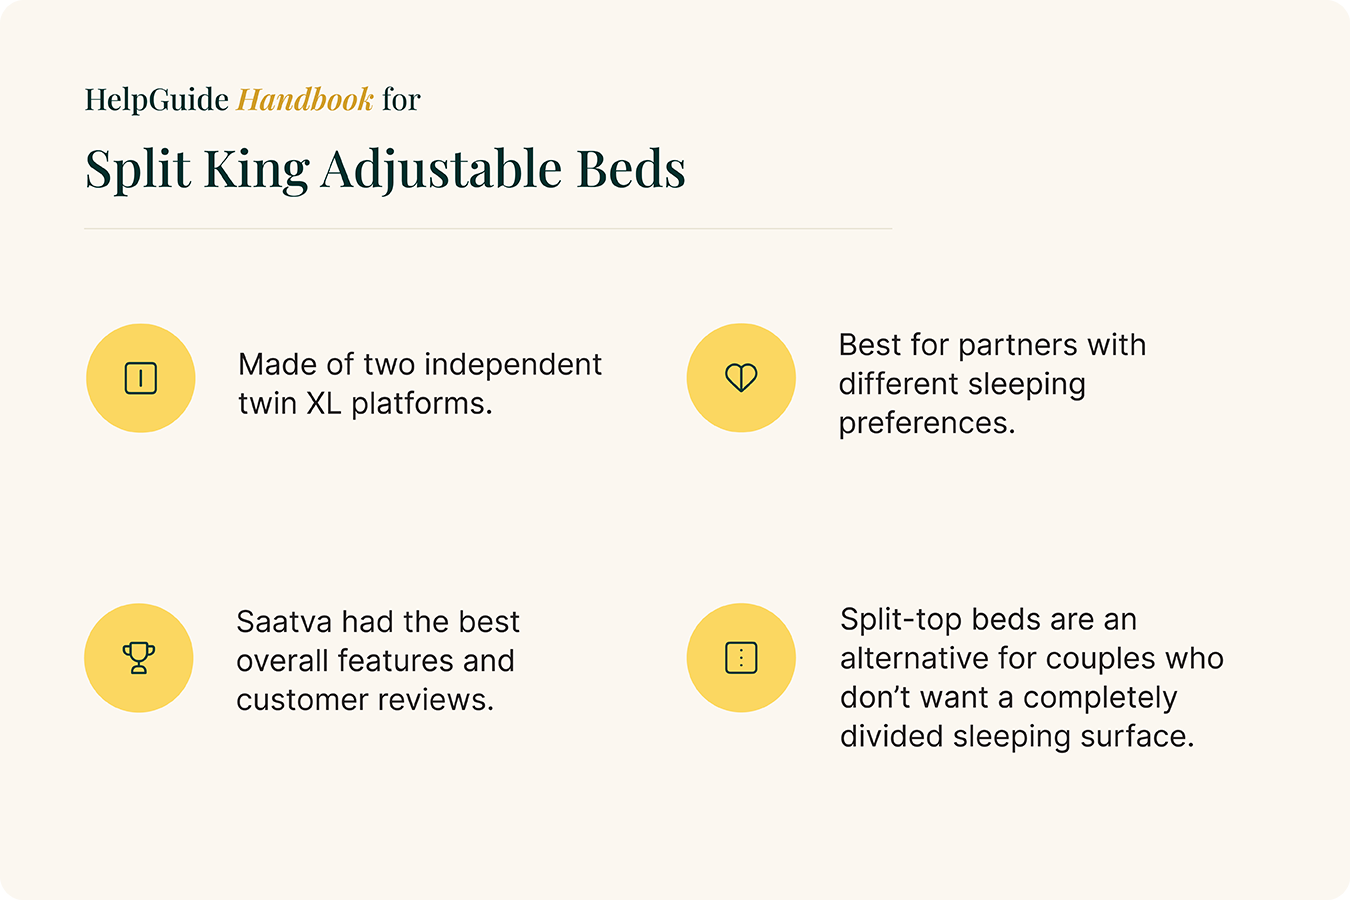 A list of the four biggest takeaways about split king adjustable beds